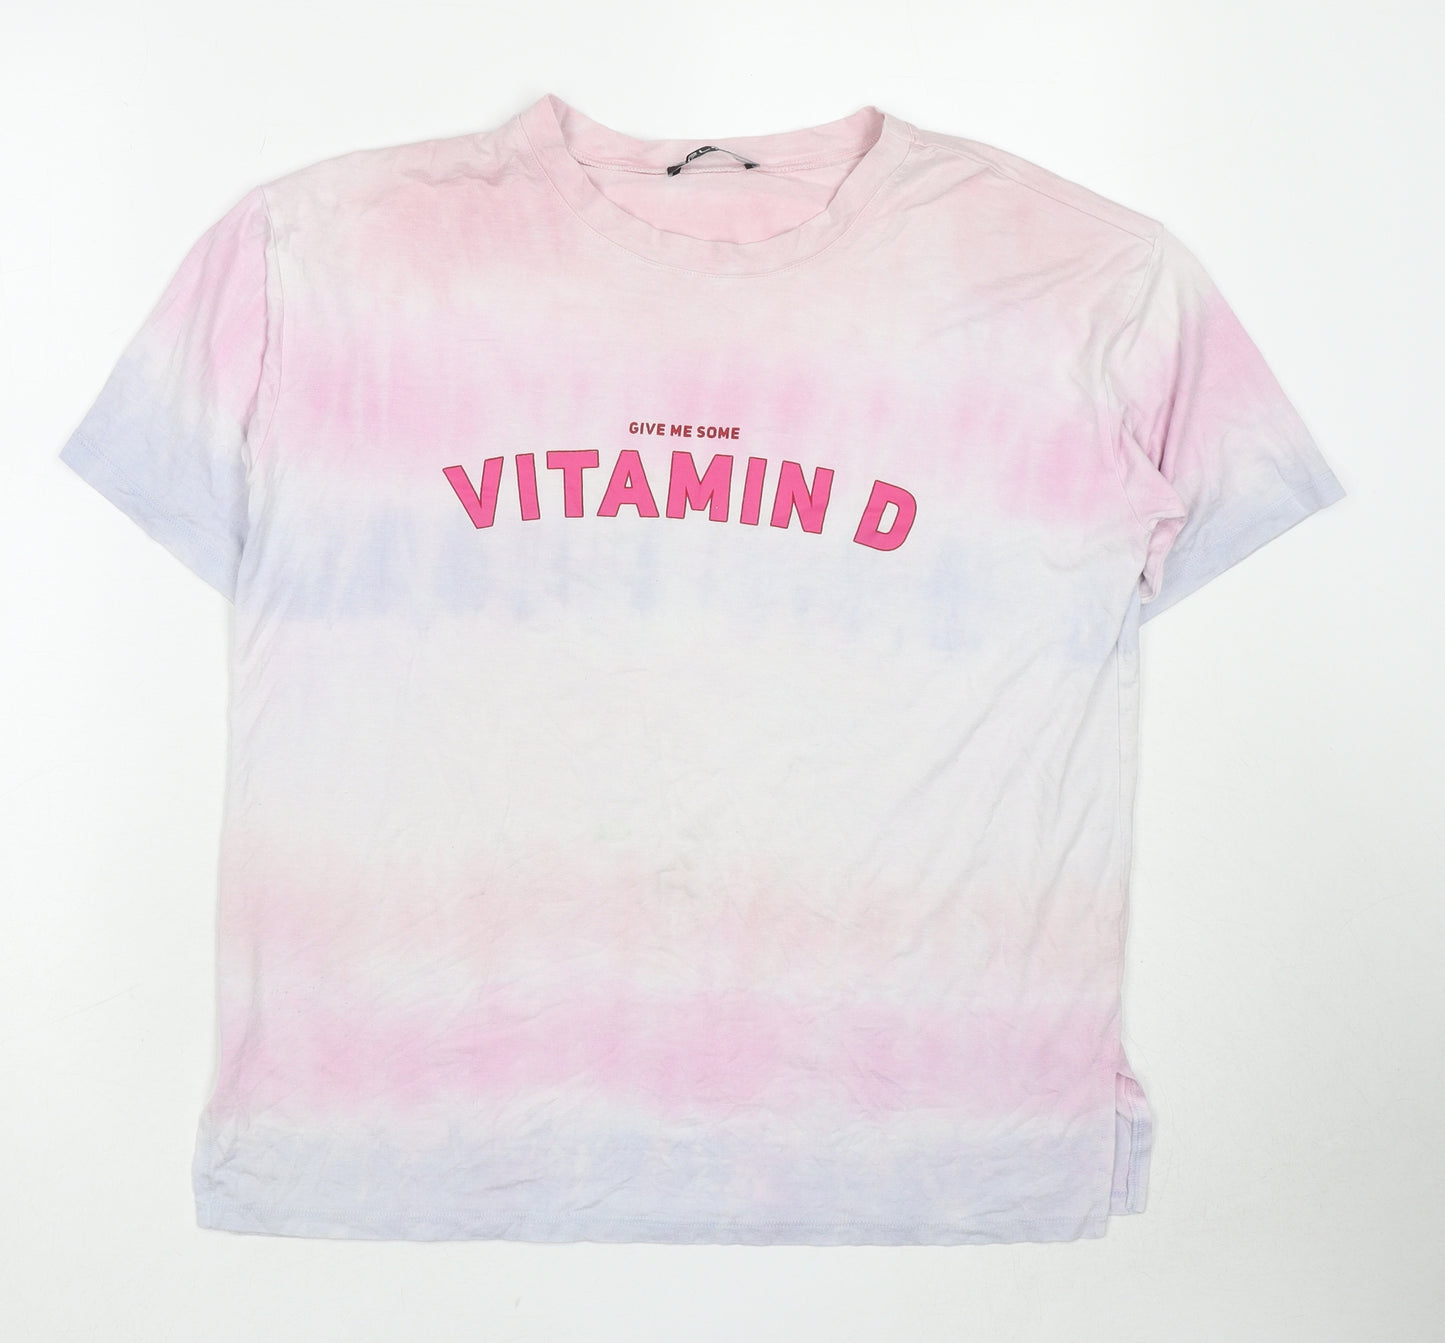 Selected Womens Multicoloured Viscose Basic T-Shirt Size M Crew Neck - Tie-Dye